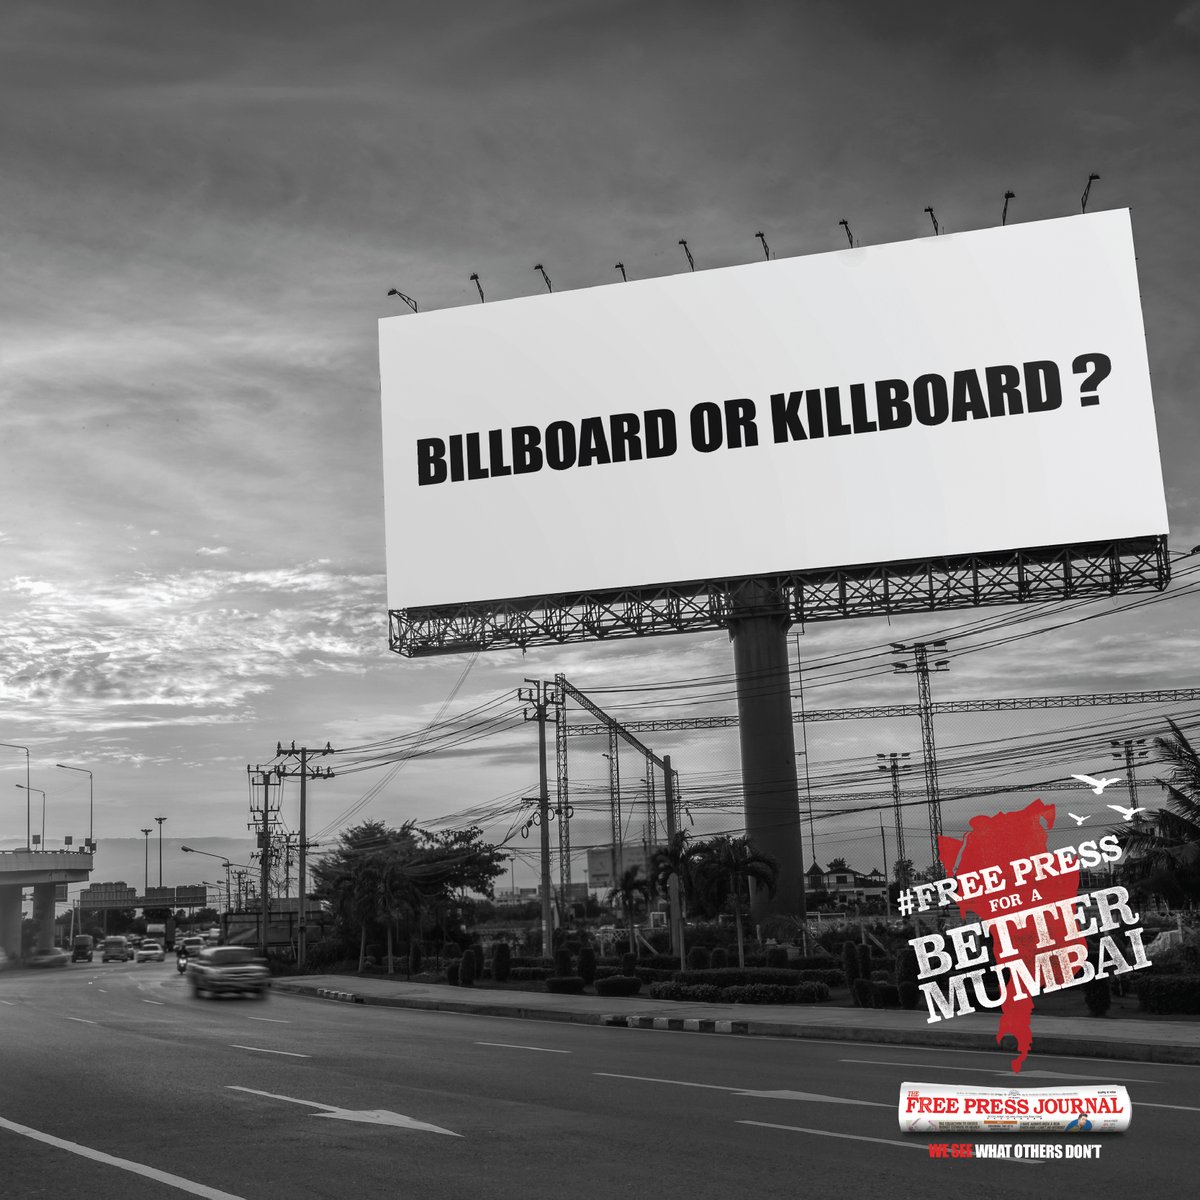 Fed up with Illegal Hoardings across Mumbai? If you spot any, send photos with location details to fpjreaderreporter@gmail.com or tag @fpjindia using #RemoveKillerHoardings on X. The tumbling down of a mammoth 120-foot hoarding also crumbled our trust in the system. When the